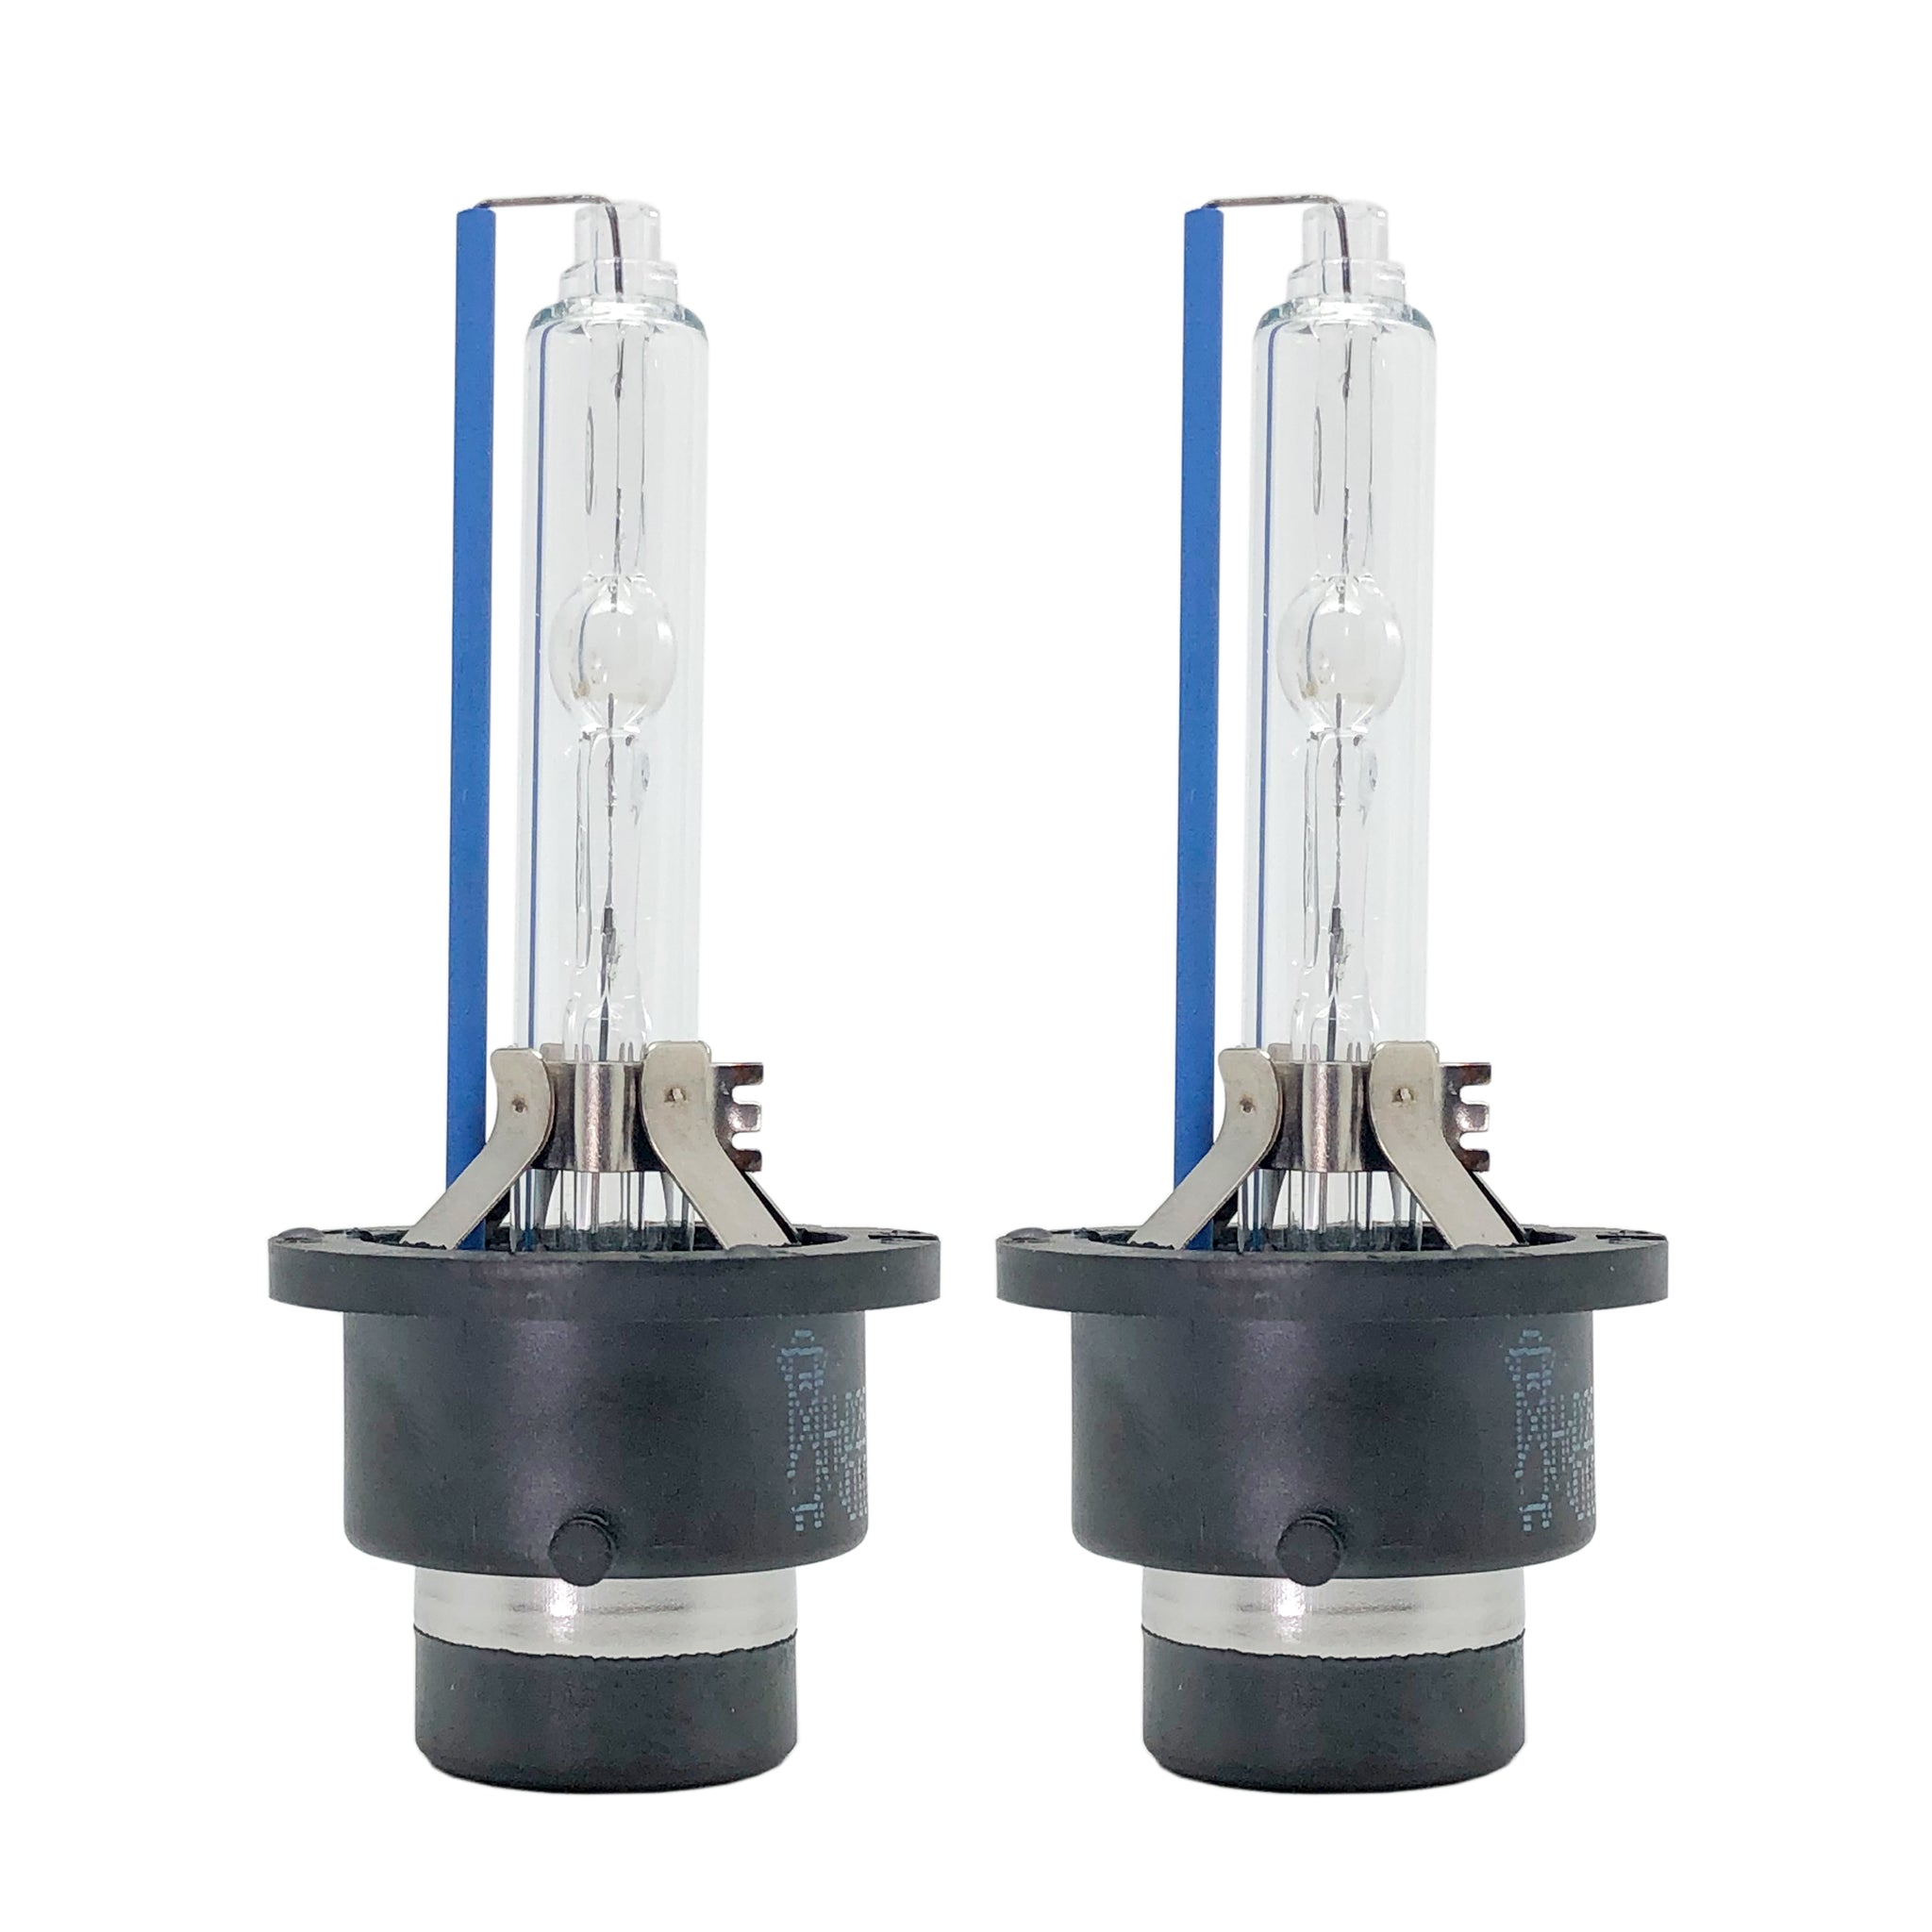 D4S HID Xenon Headlight Replacement Bulb for High or Low Beam 6000K Diamond White Pack of 2